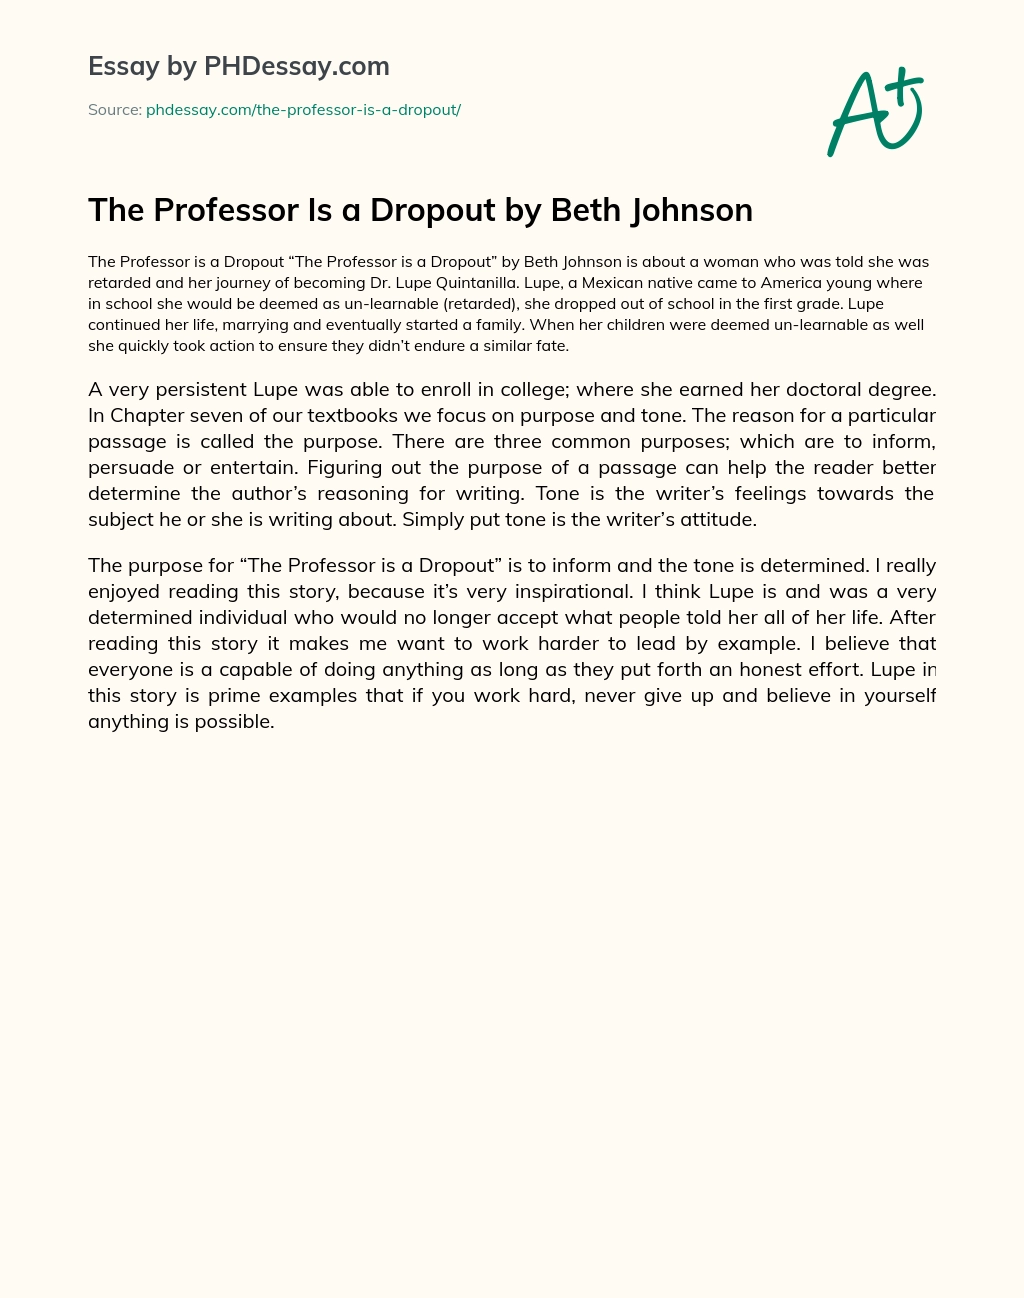 The Professor Is a Dropout by Beth Johnson essay